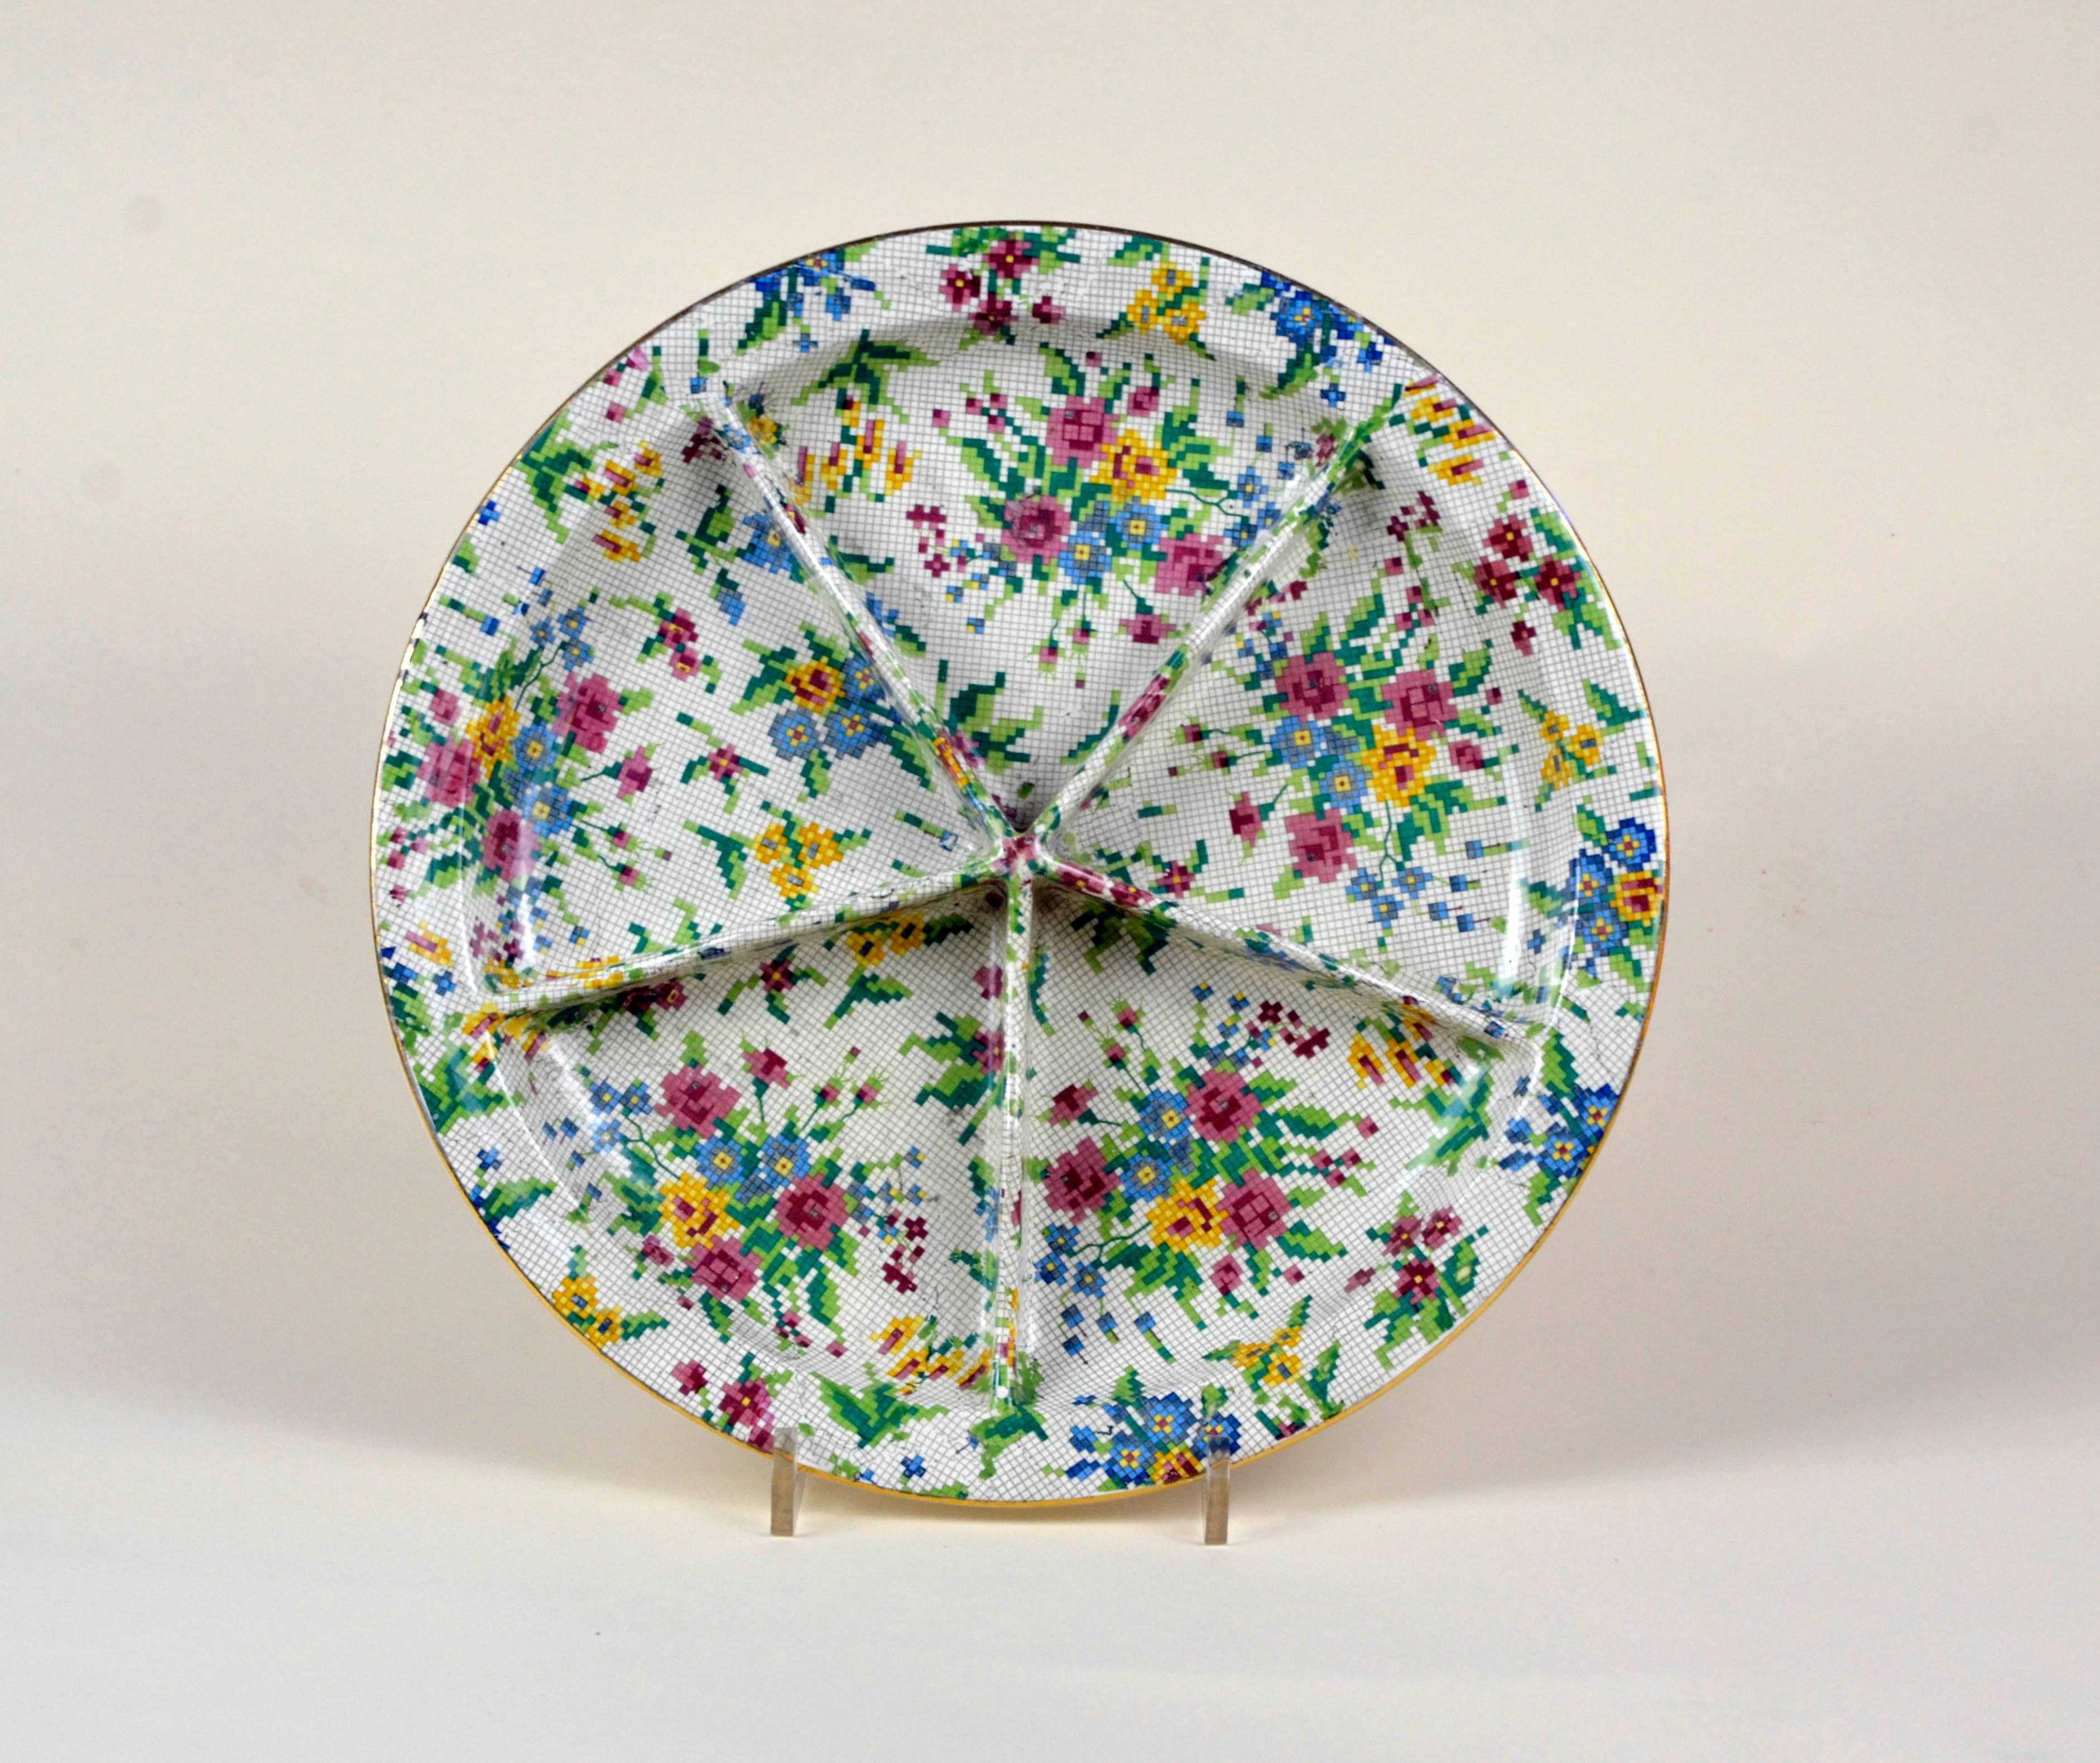 Rare Royal Winton earthenware relish dish in pristine condition, not restored and ready to be used. The Queen Anne (1936) needlepoint pattern is part of the famed Chintz collection by Royal Winton. It consists of bouquets of flowers in pink, blue